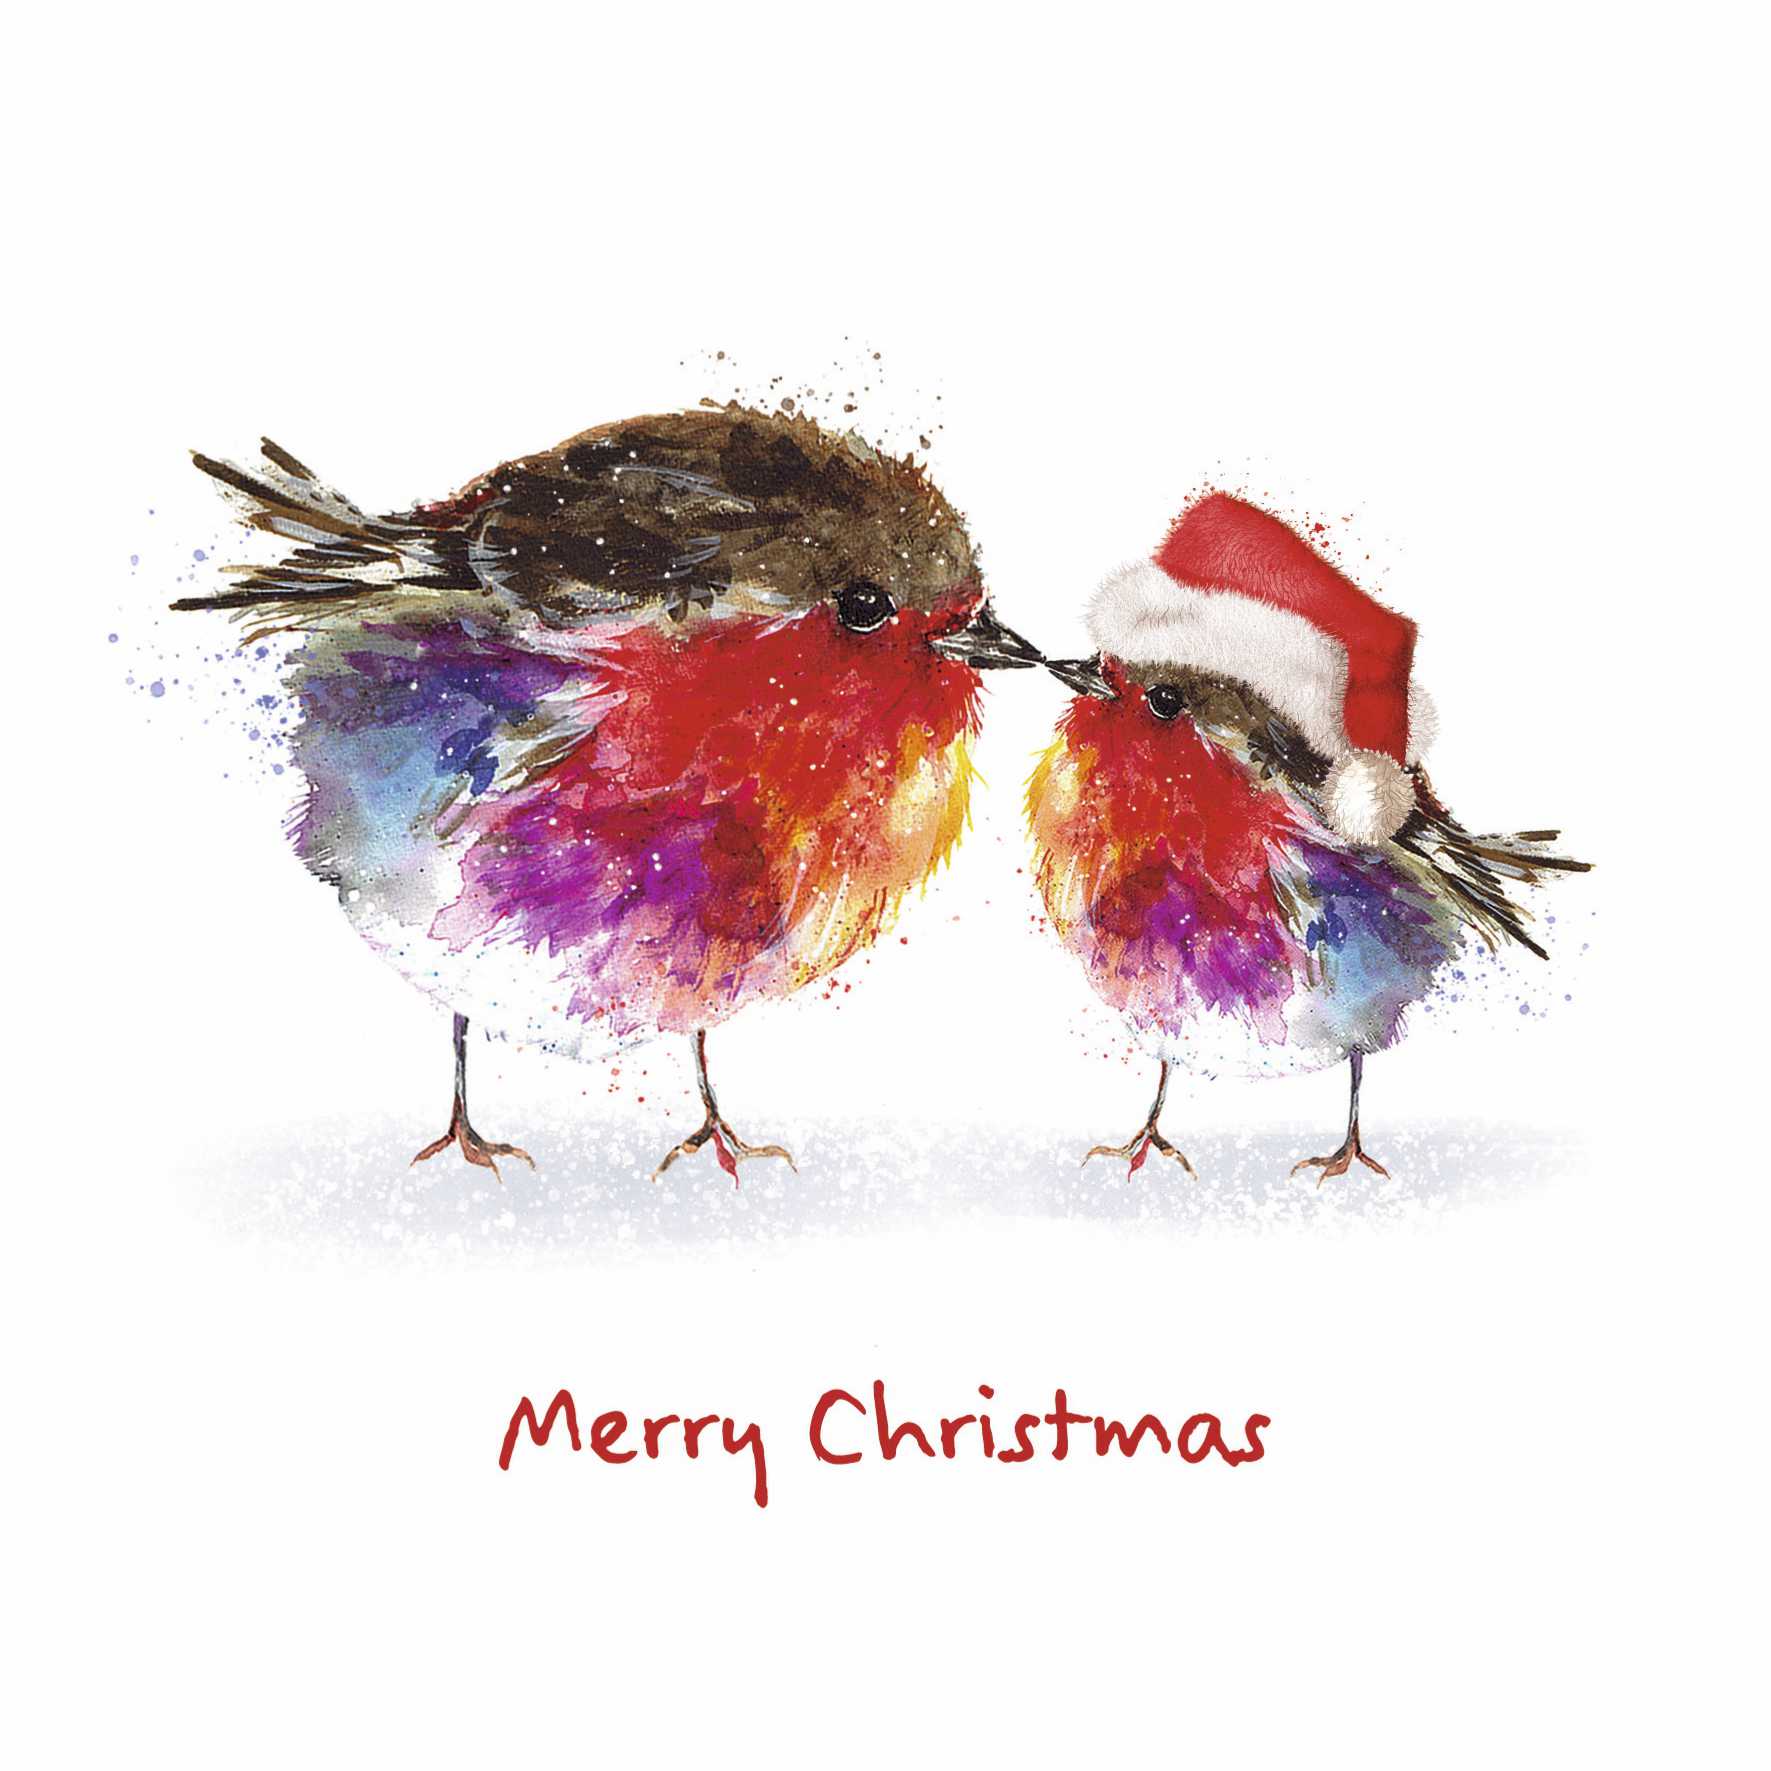 Watercolour illustration of two robins touching beaks. The righthand robin is smaller and wearing a red and white santa hat. Red text reads Merry Christmas.